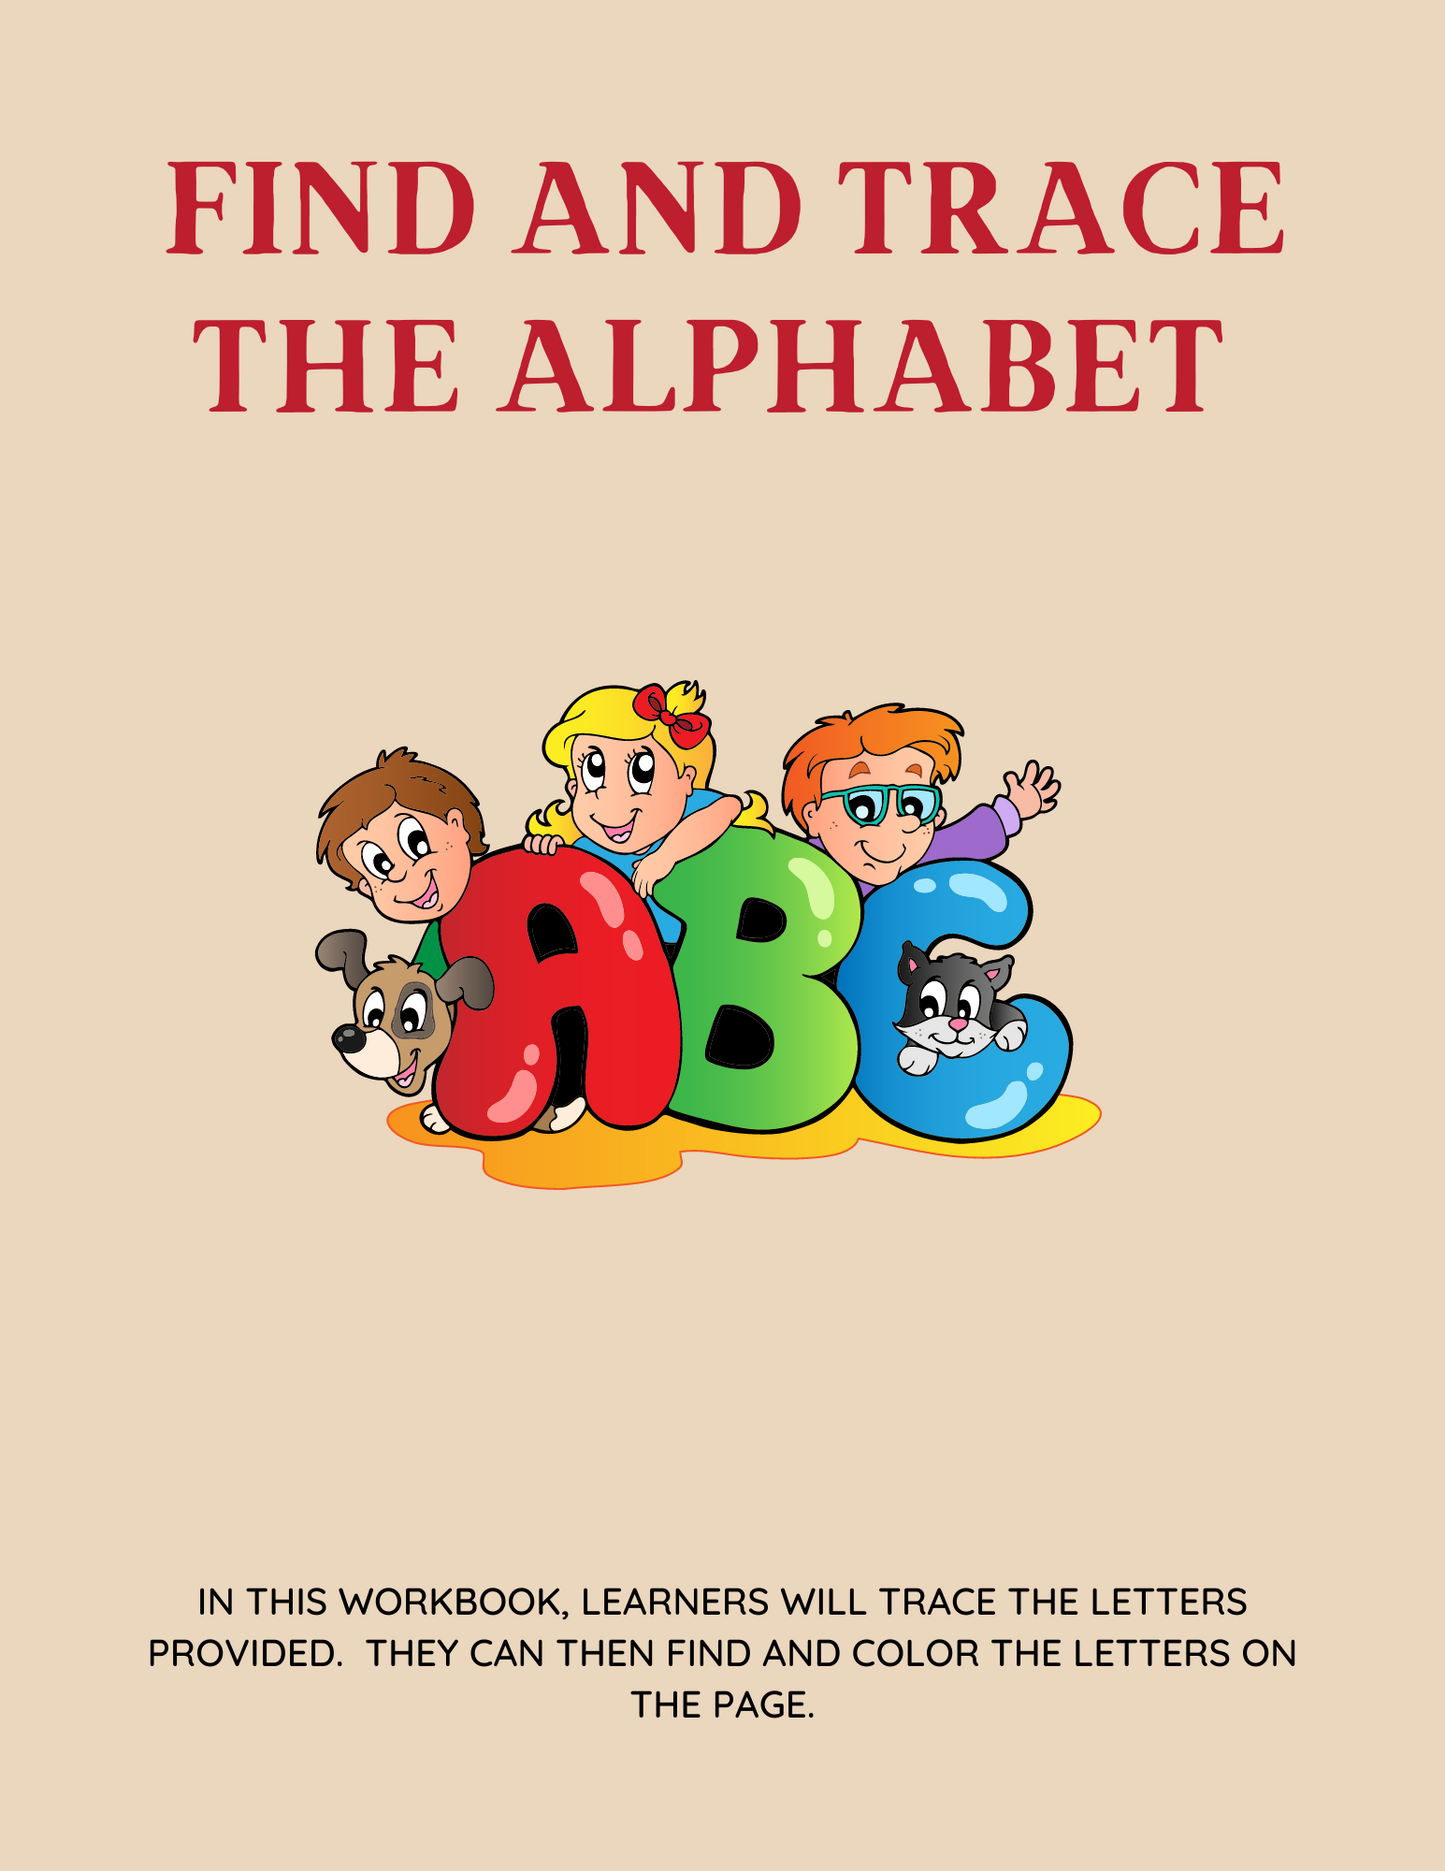 Find, Trace & Color the Letter A to Z Alphabet Worksheet Activity Book